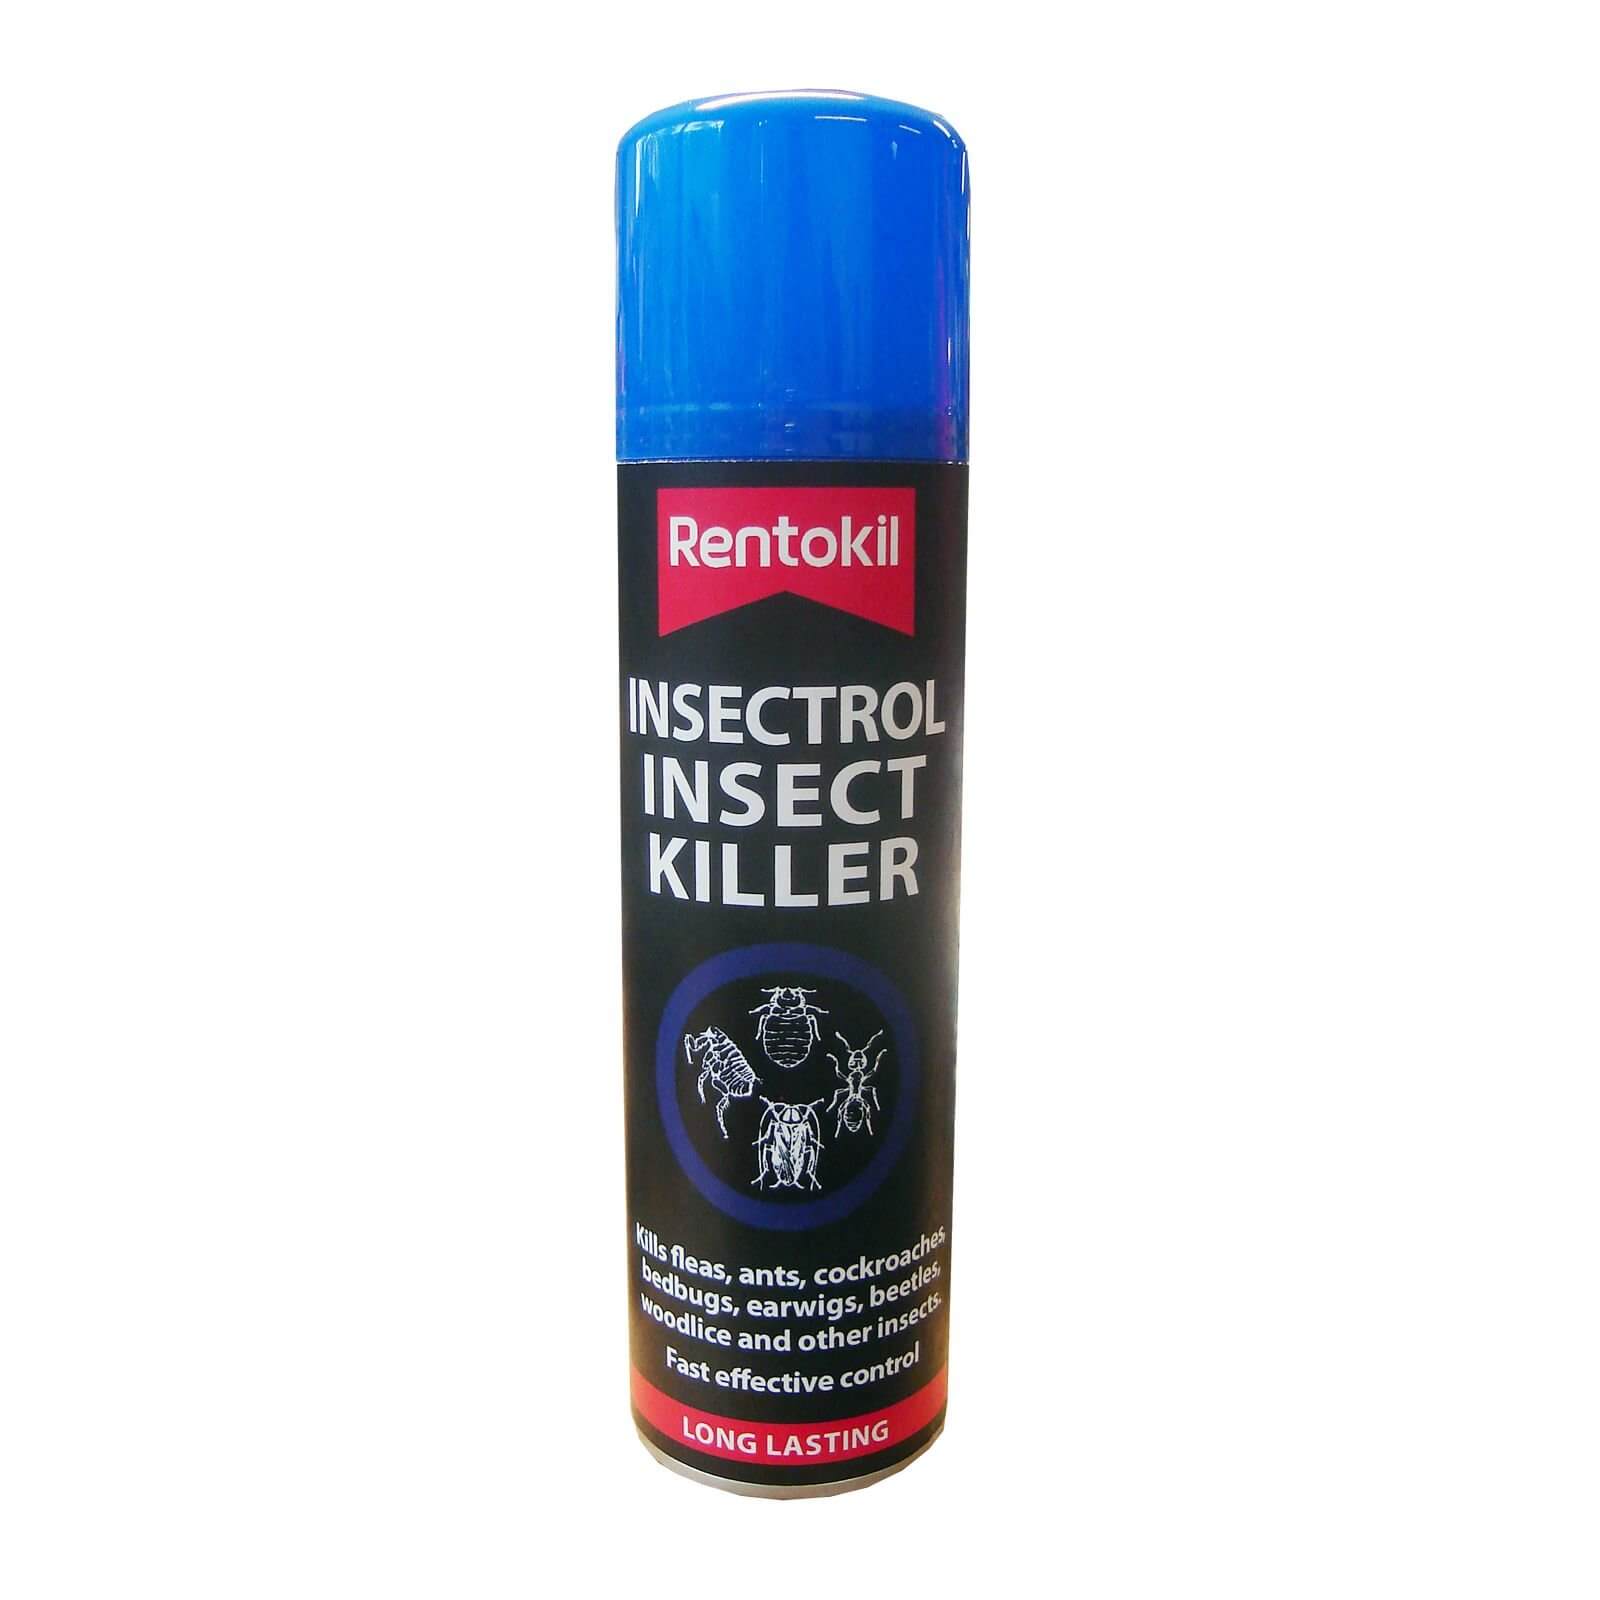 Rentokil Insectrol Insect Killer - 250ml